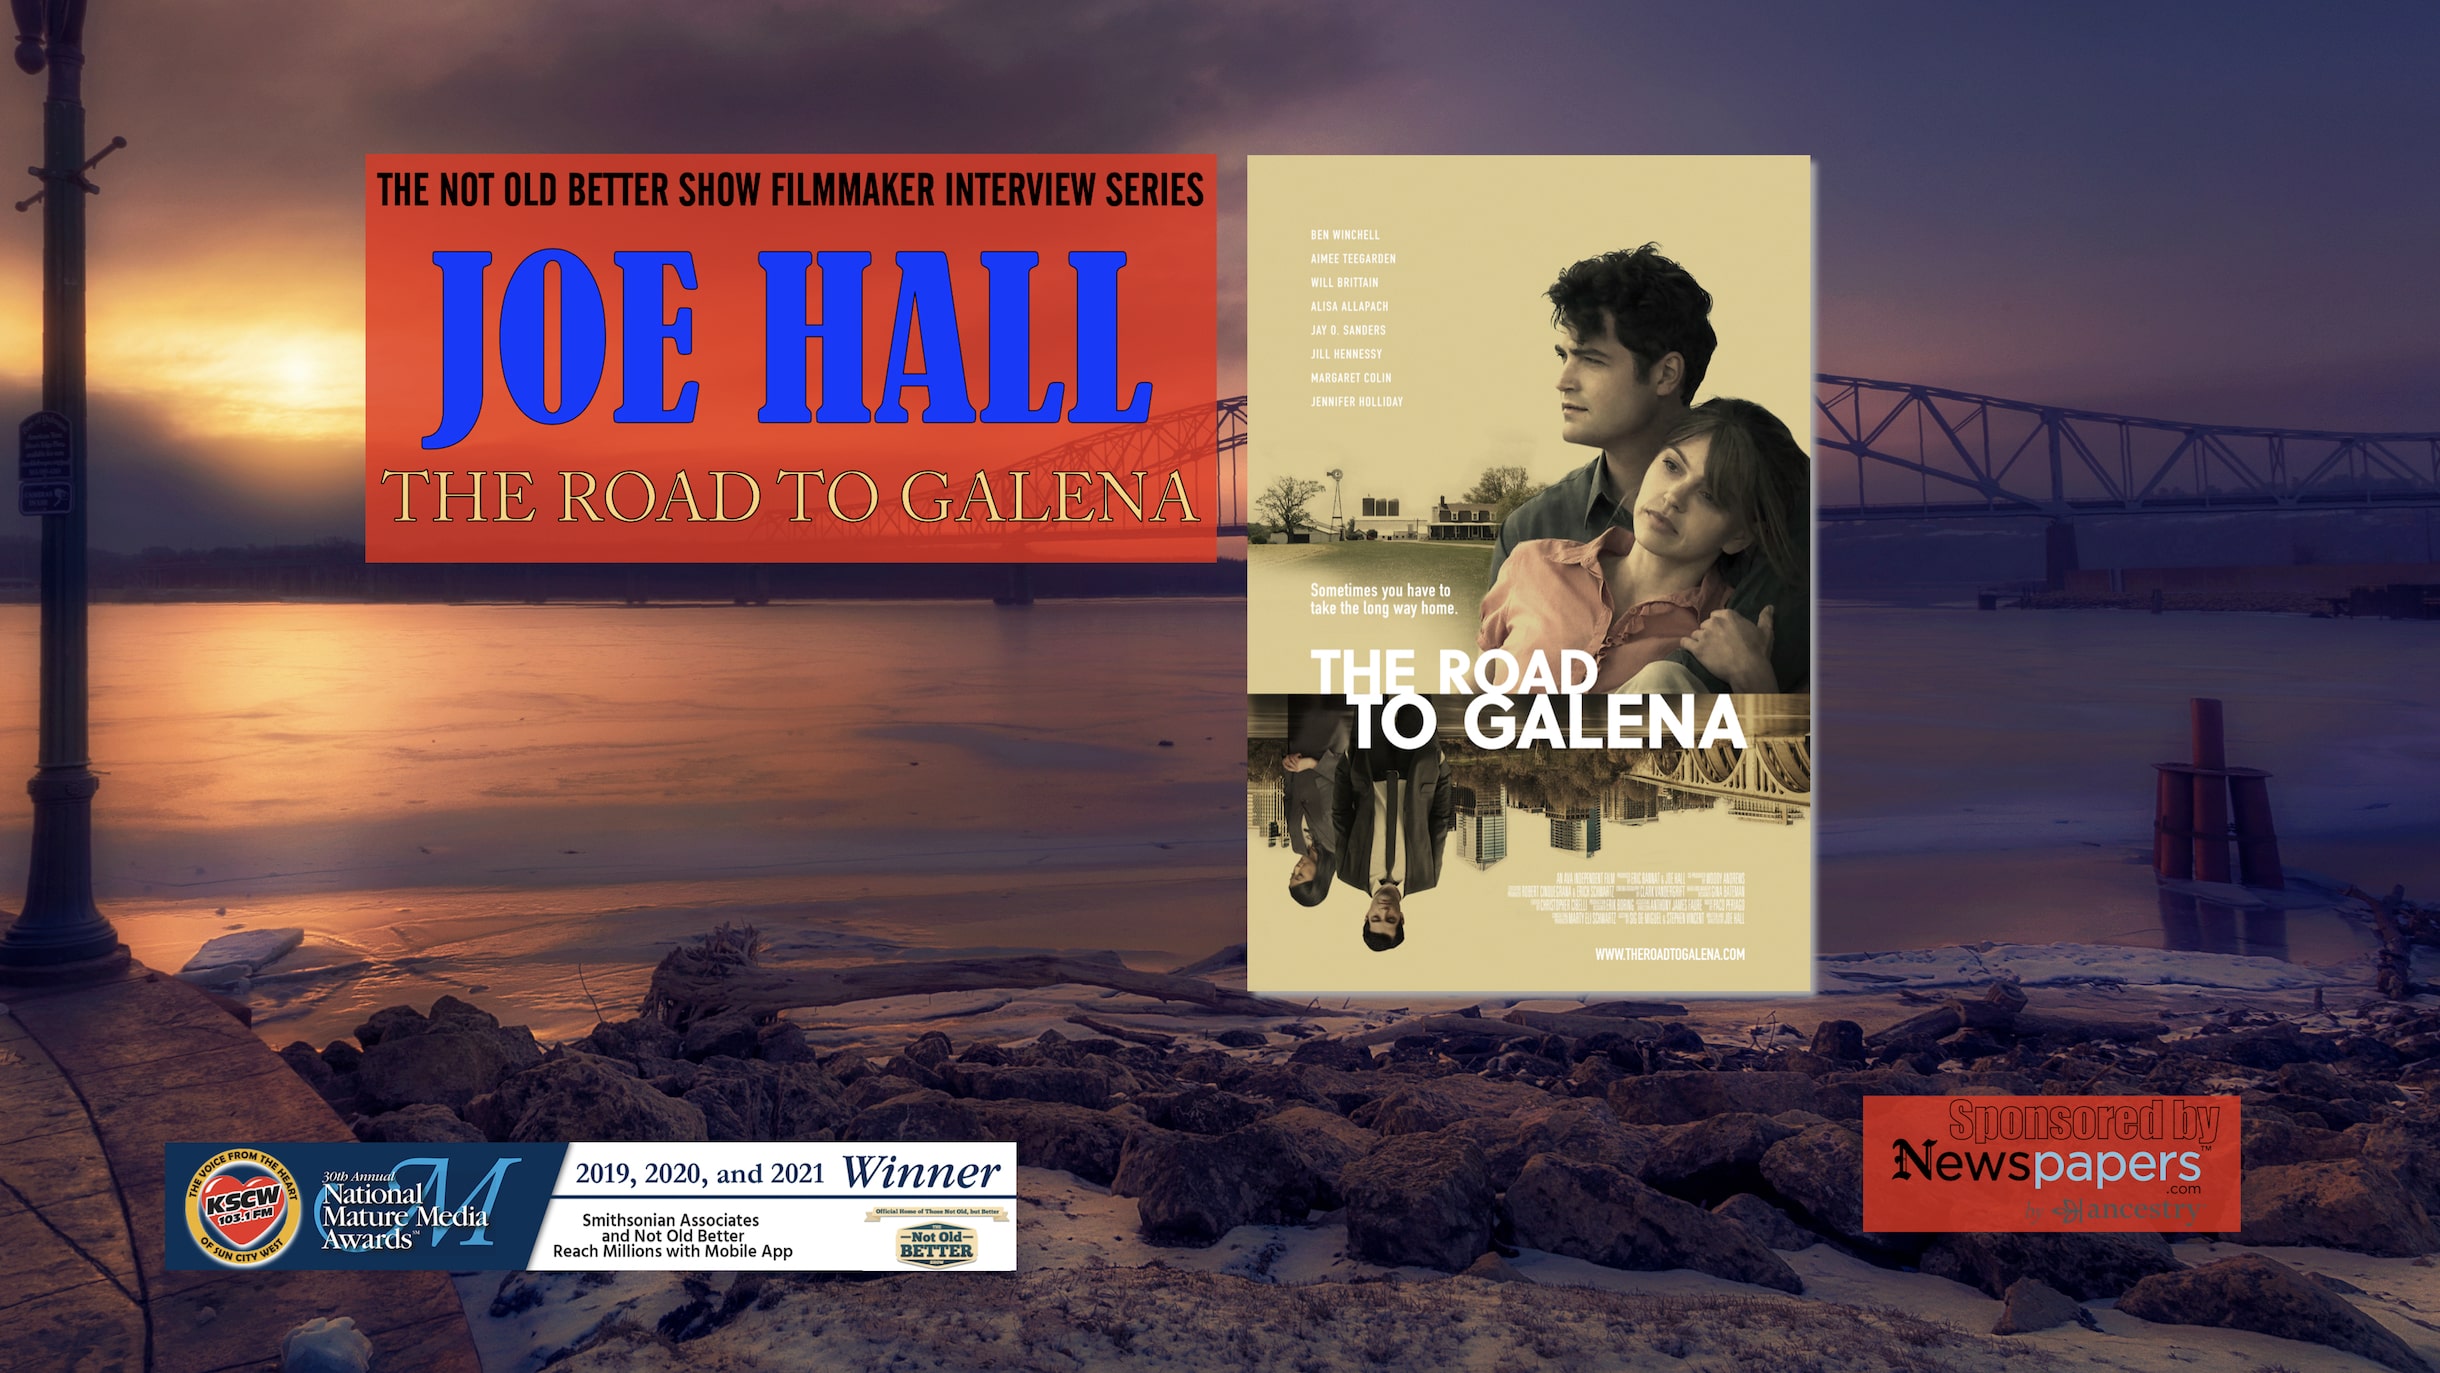 The Road To Galena – Interview with Joe Hall